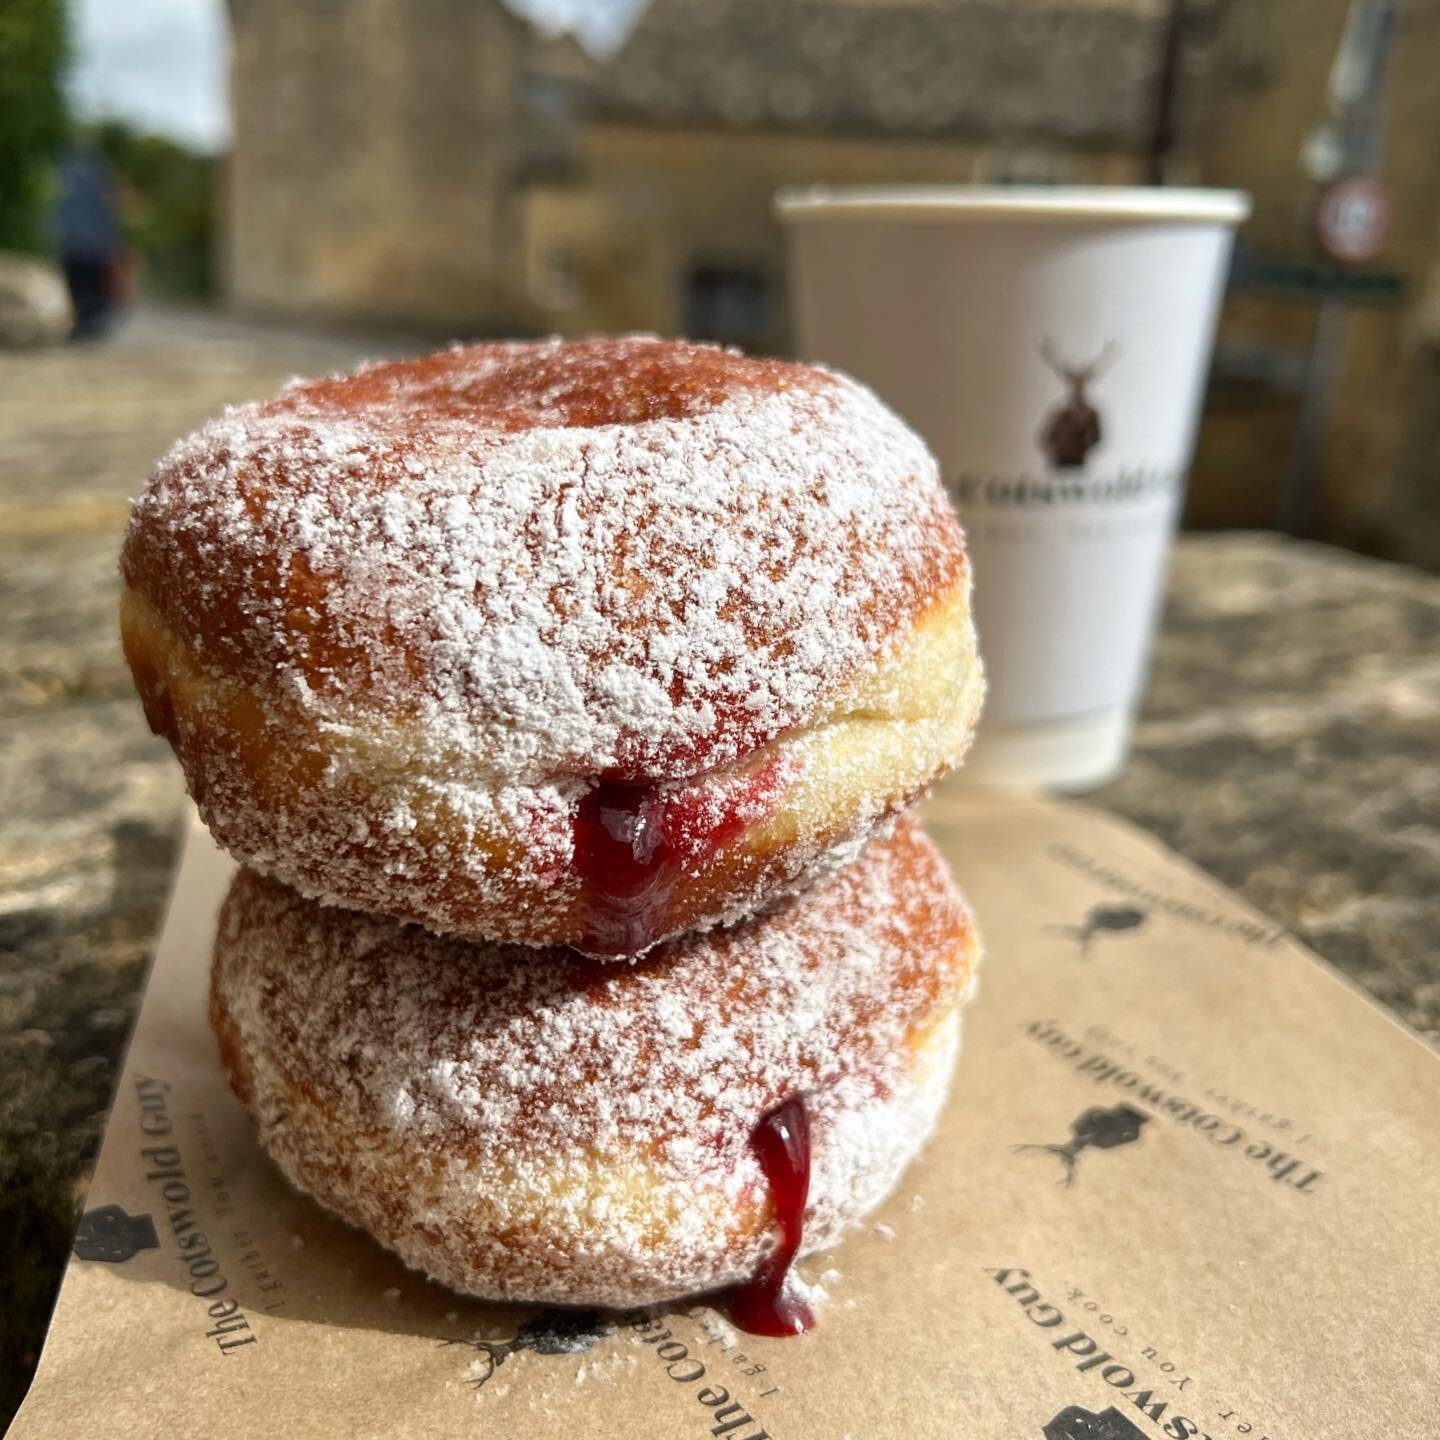 Saturday is doughnut day @thecotswoldguy